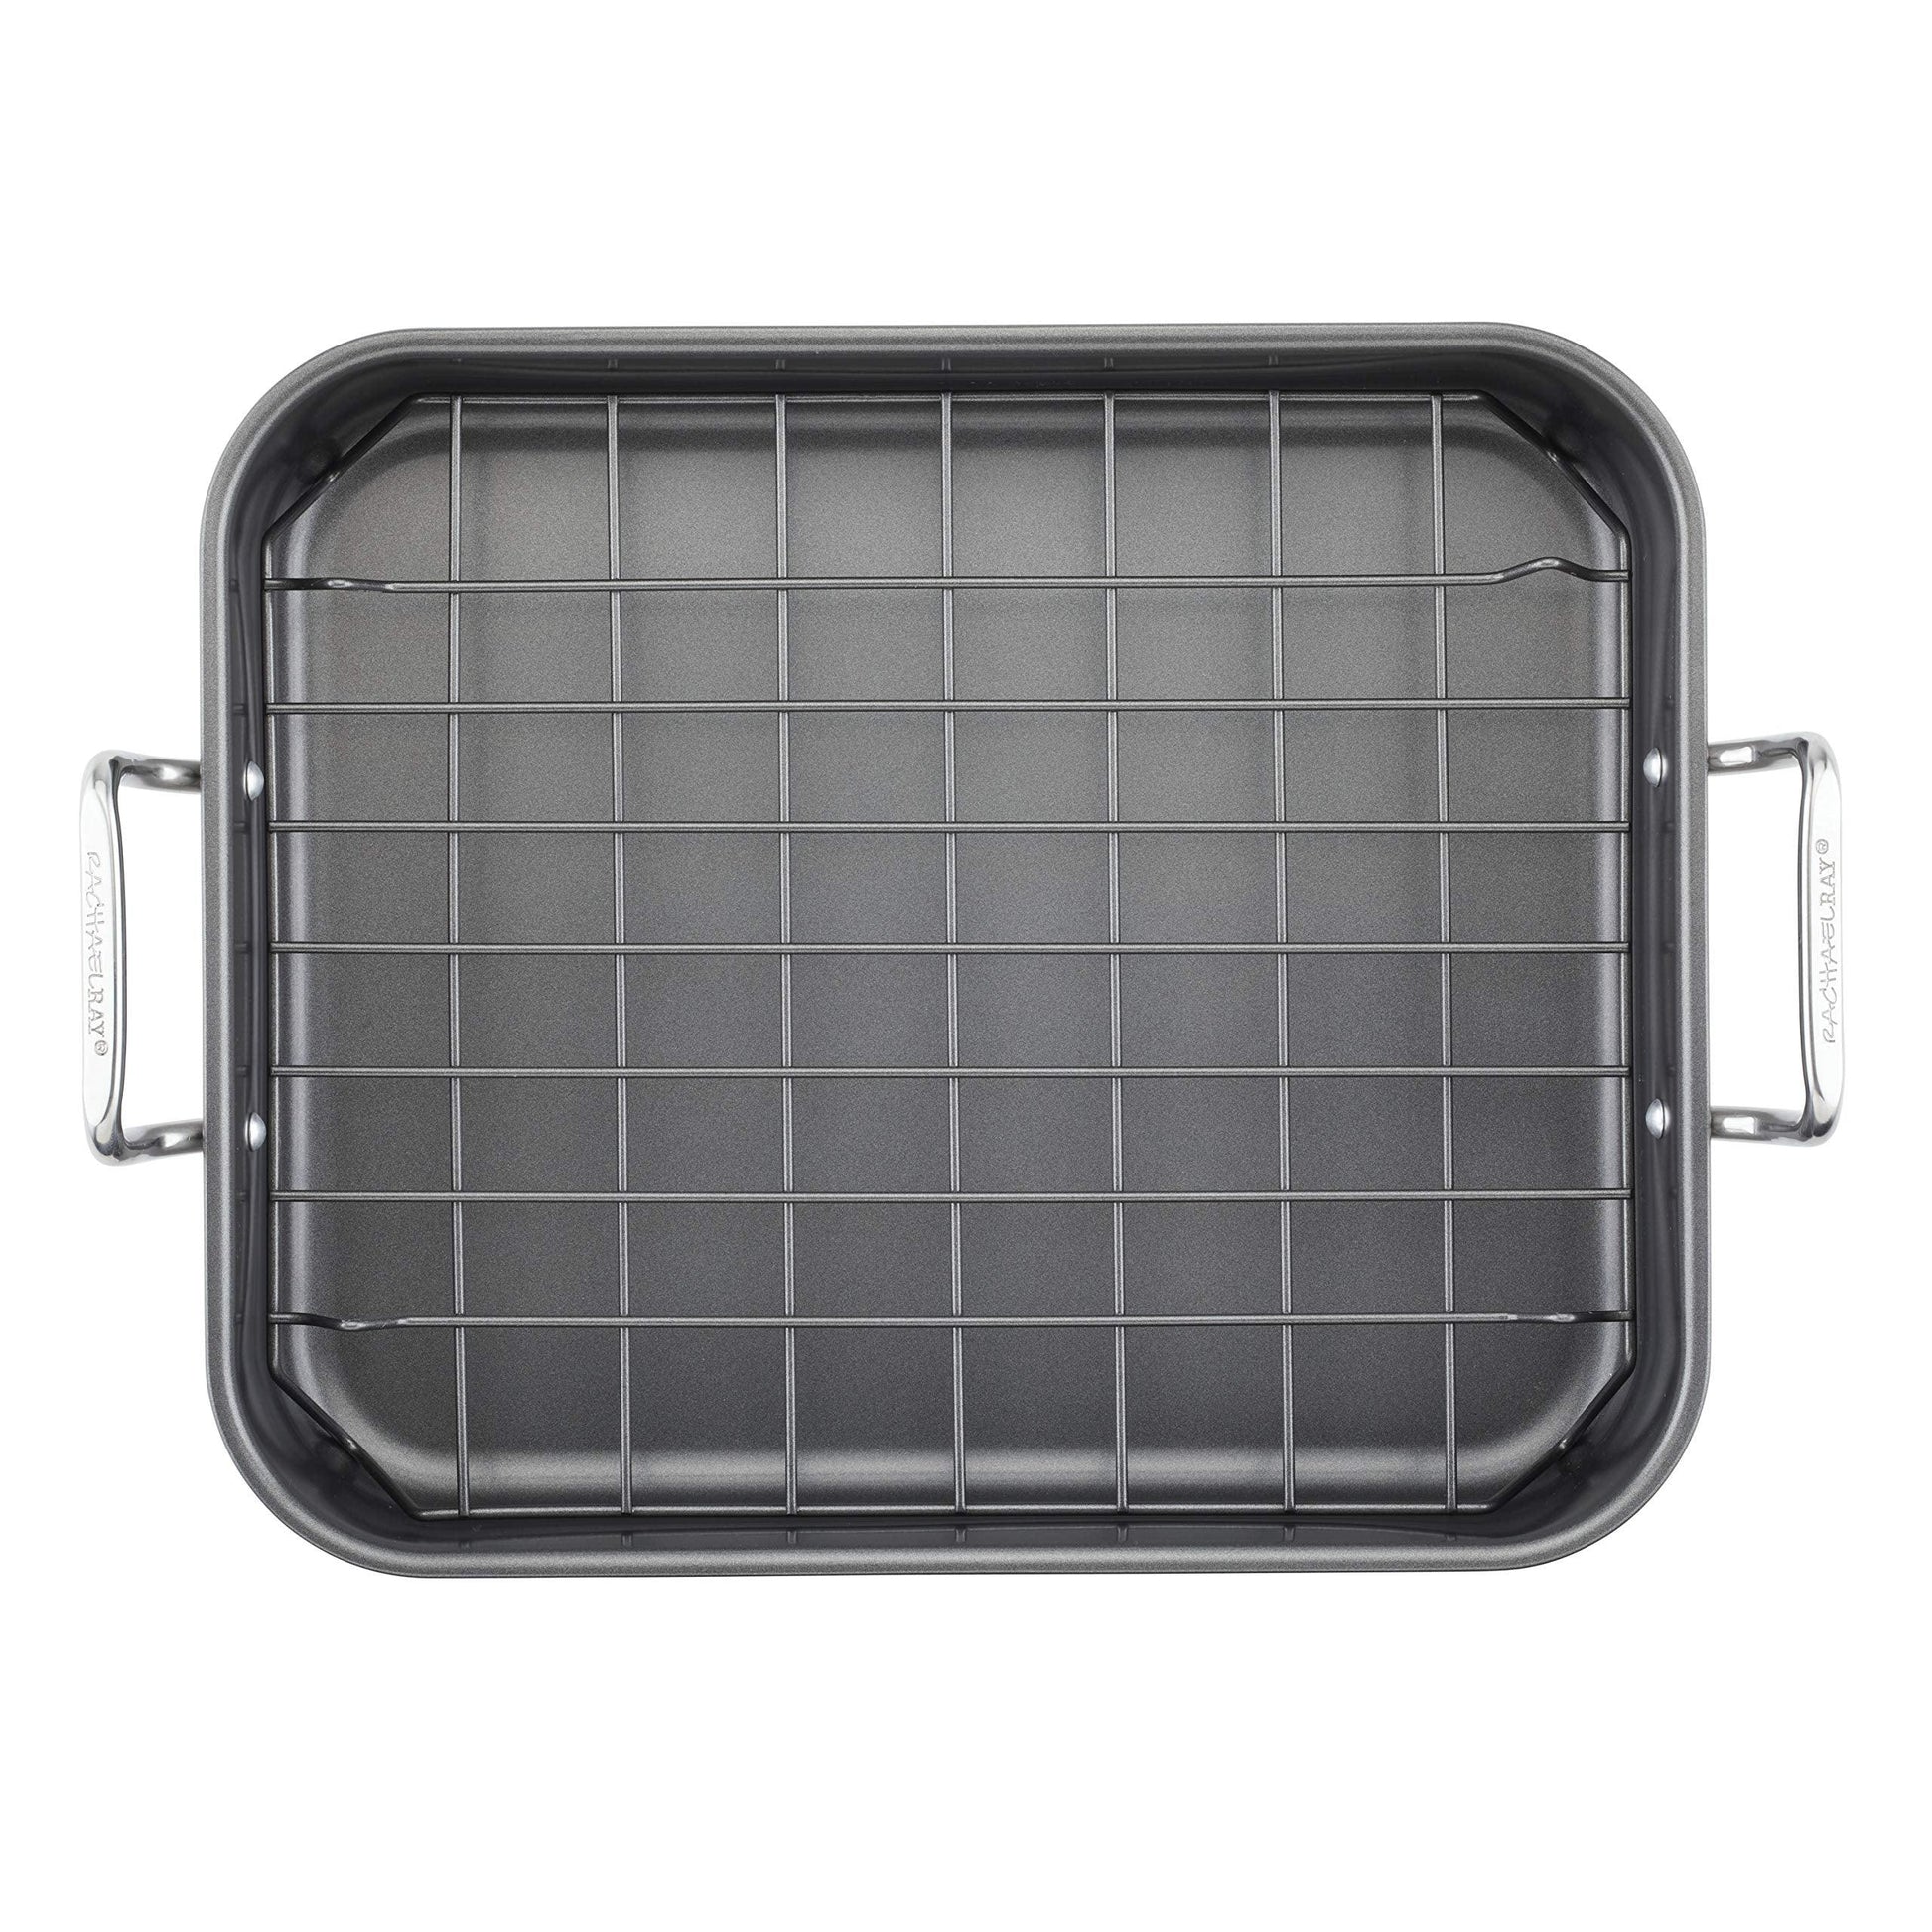 Rachael Ray Bakeware Nonstick Roaster/Roasting Pan with Reversible Rack, 16.5 Inch x 13.5 Inch, Gray - CookCave